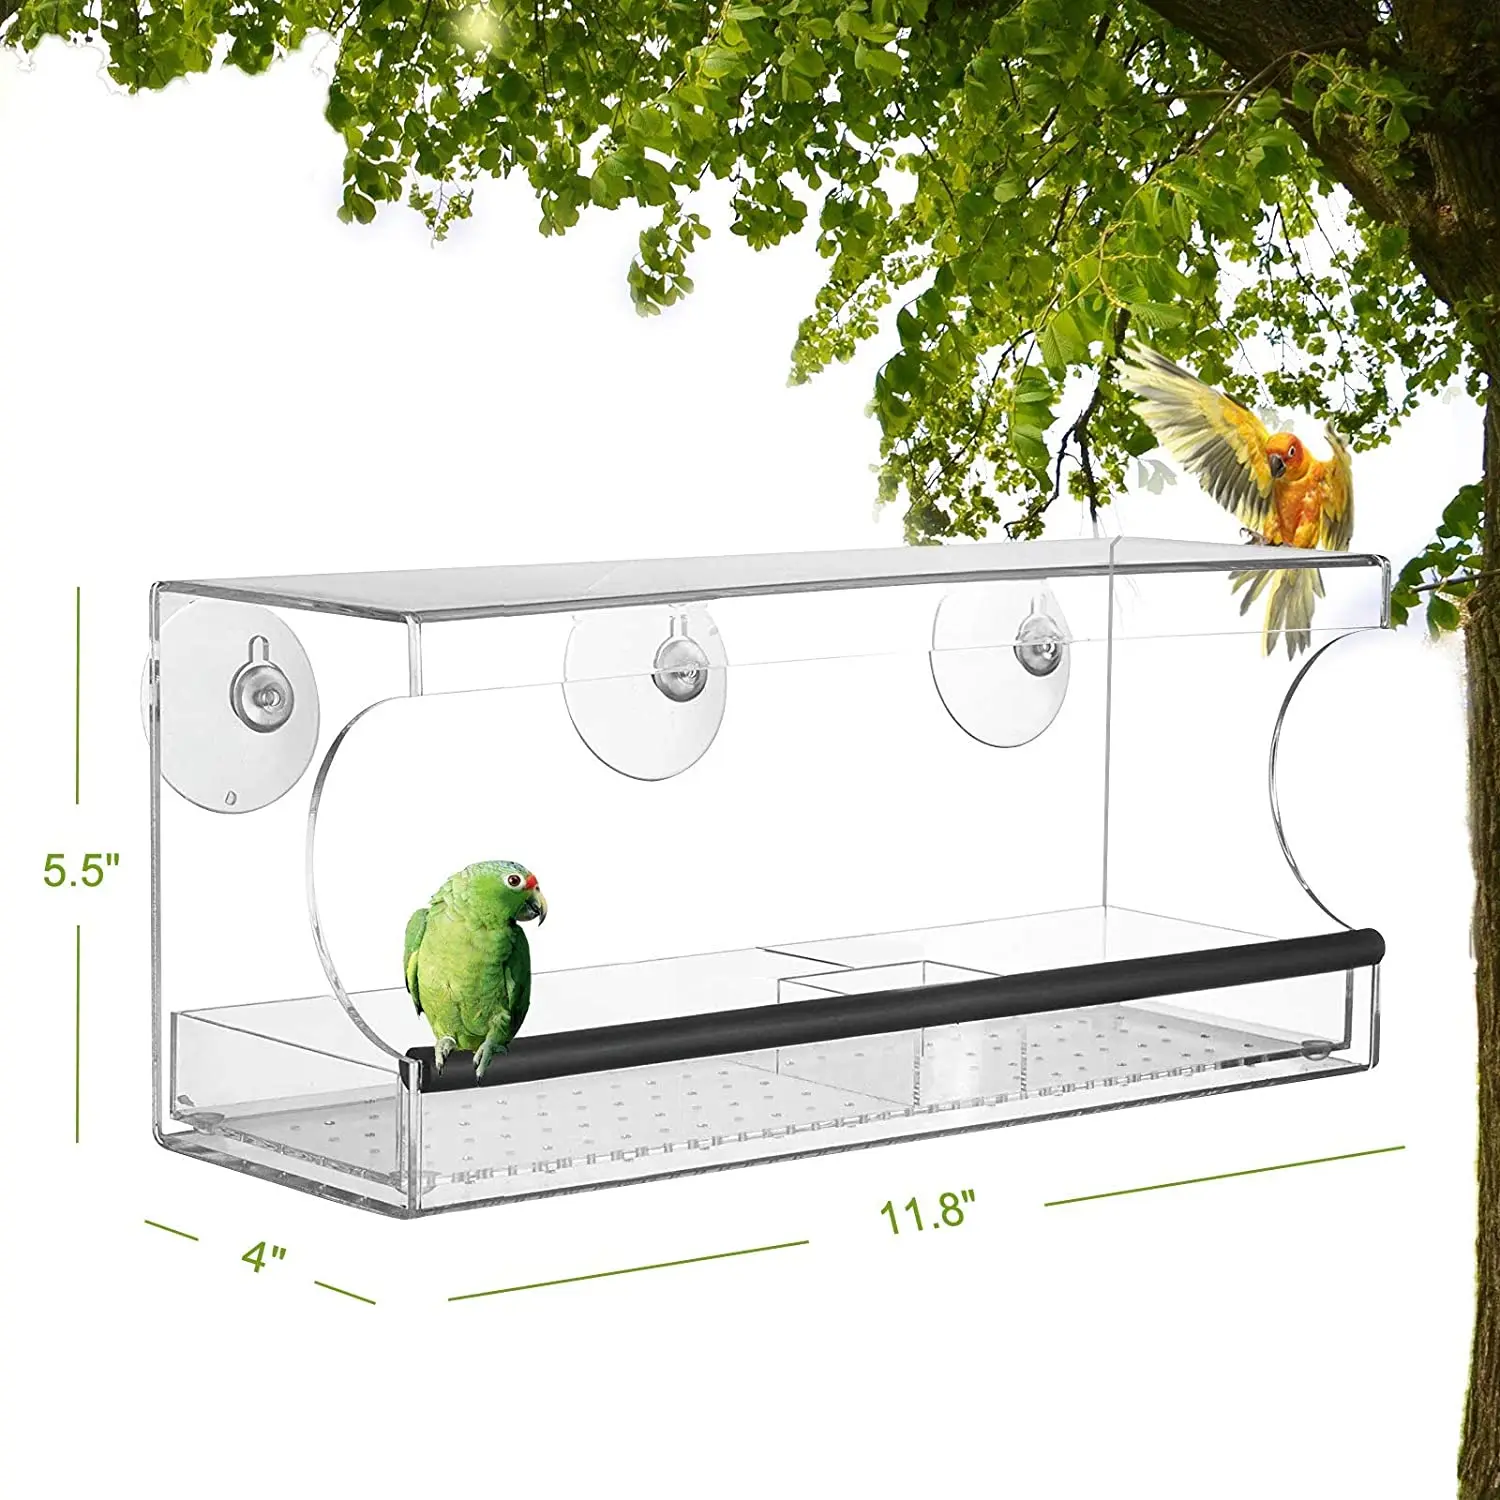 Window Bird Feeder with Strong Suction Cups and Seed Tray With 3 Extra Suction 